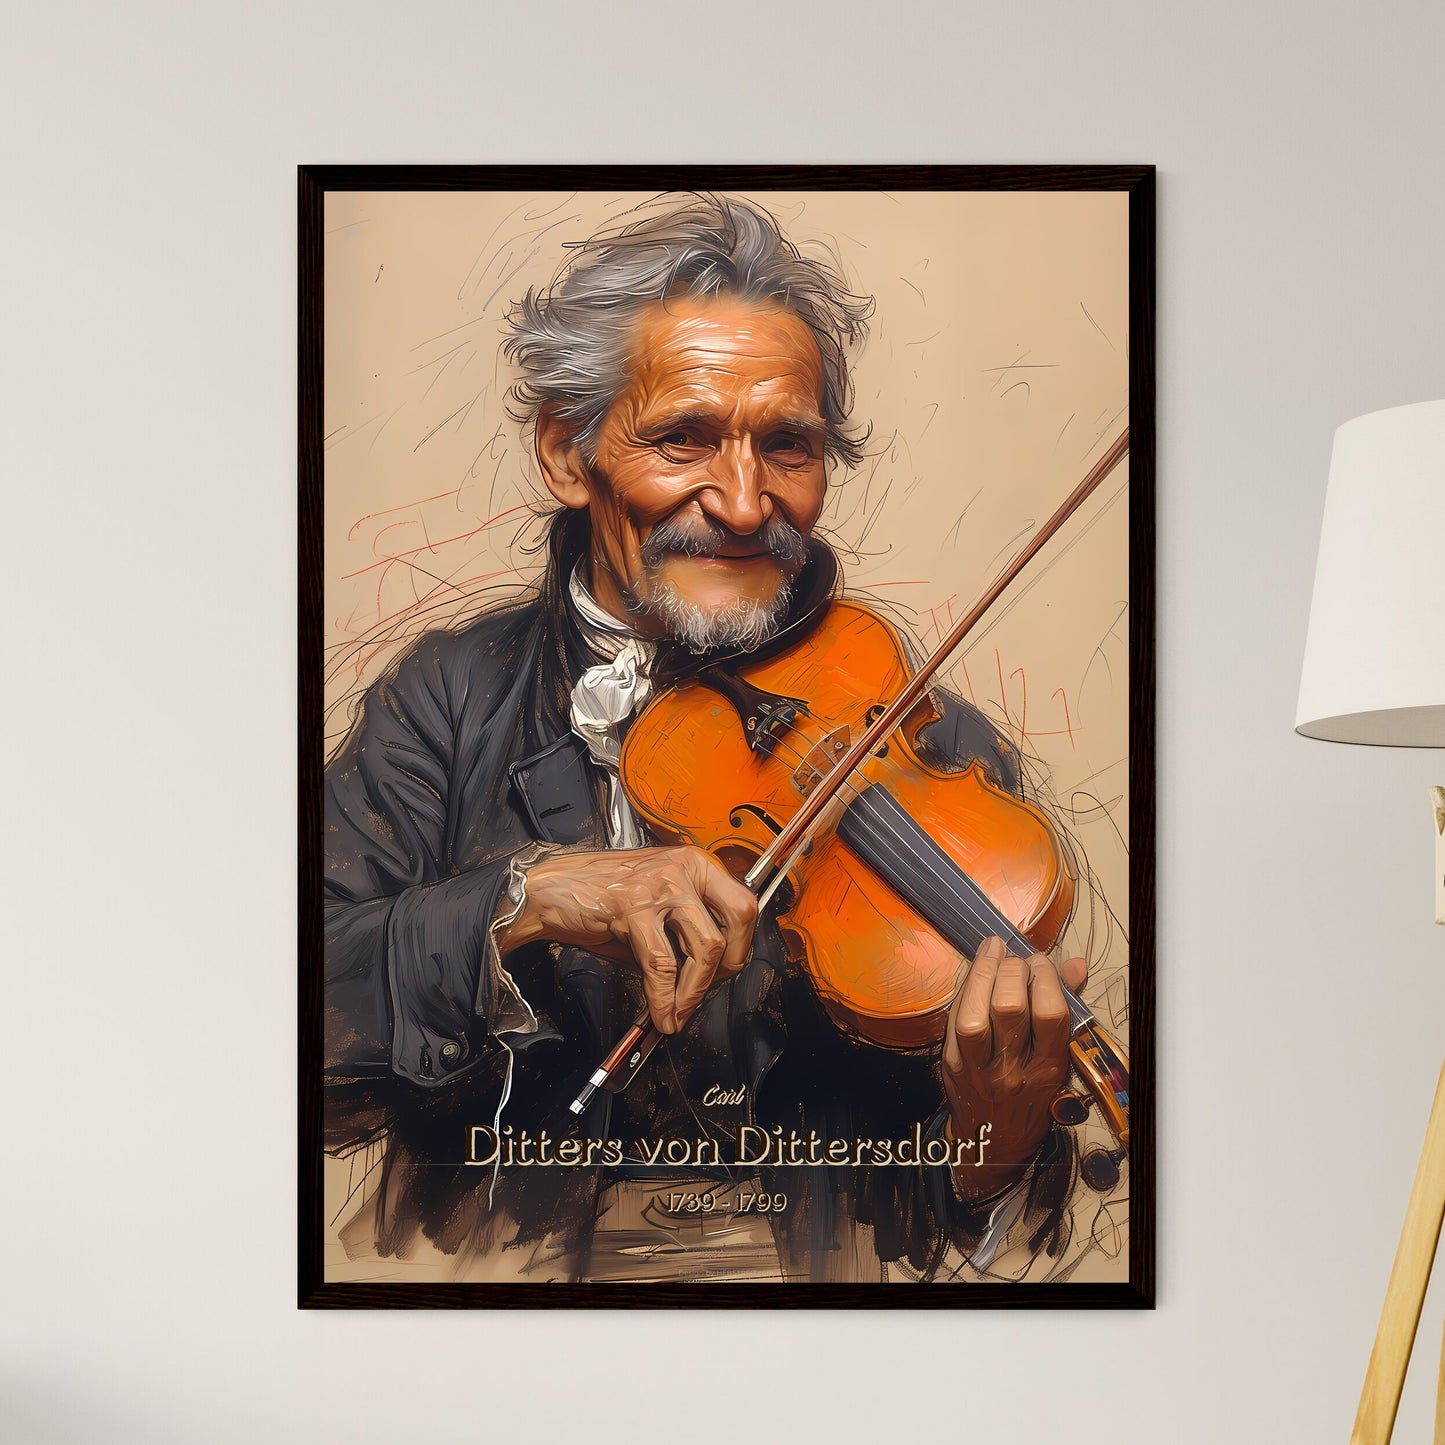 Carl, Ditters von Dittersdorf, 1739 - 1799, A Poster of a man playing a violin Default Title